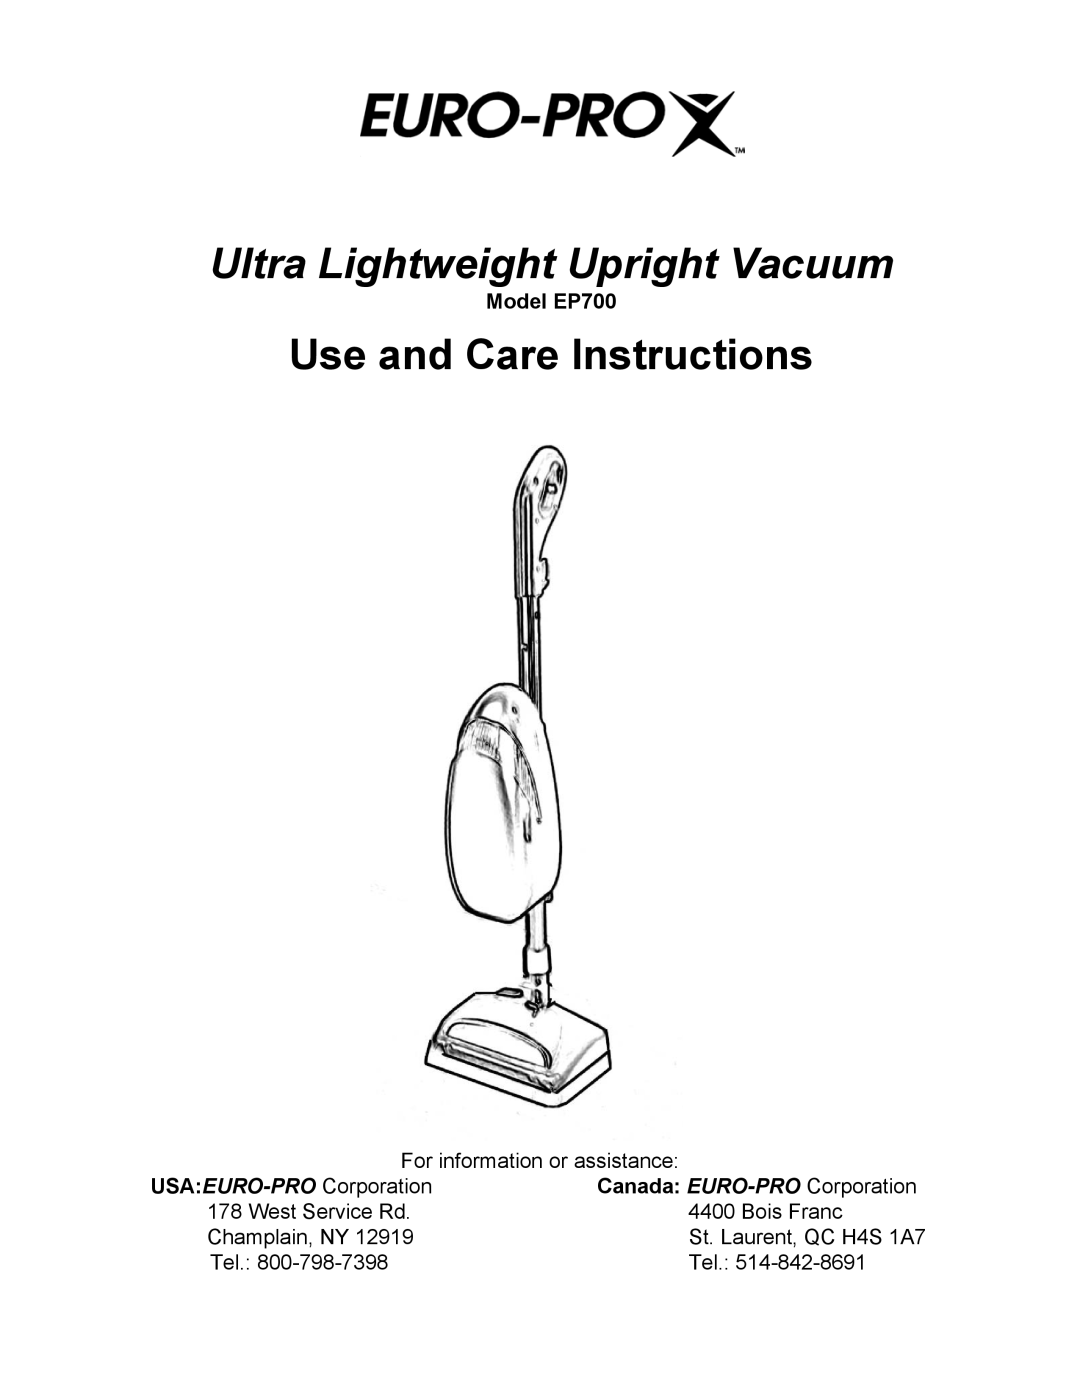 Euro-Pro manual Use and Care Instructions, Model EP700, Ultra Lightweight Upright Vacuum 